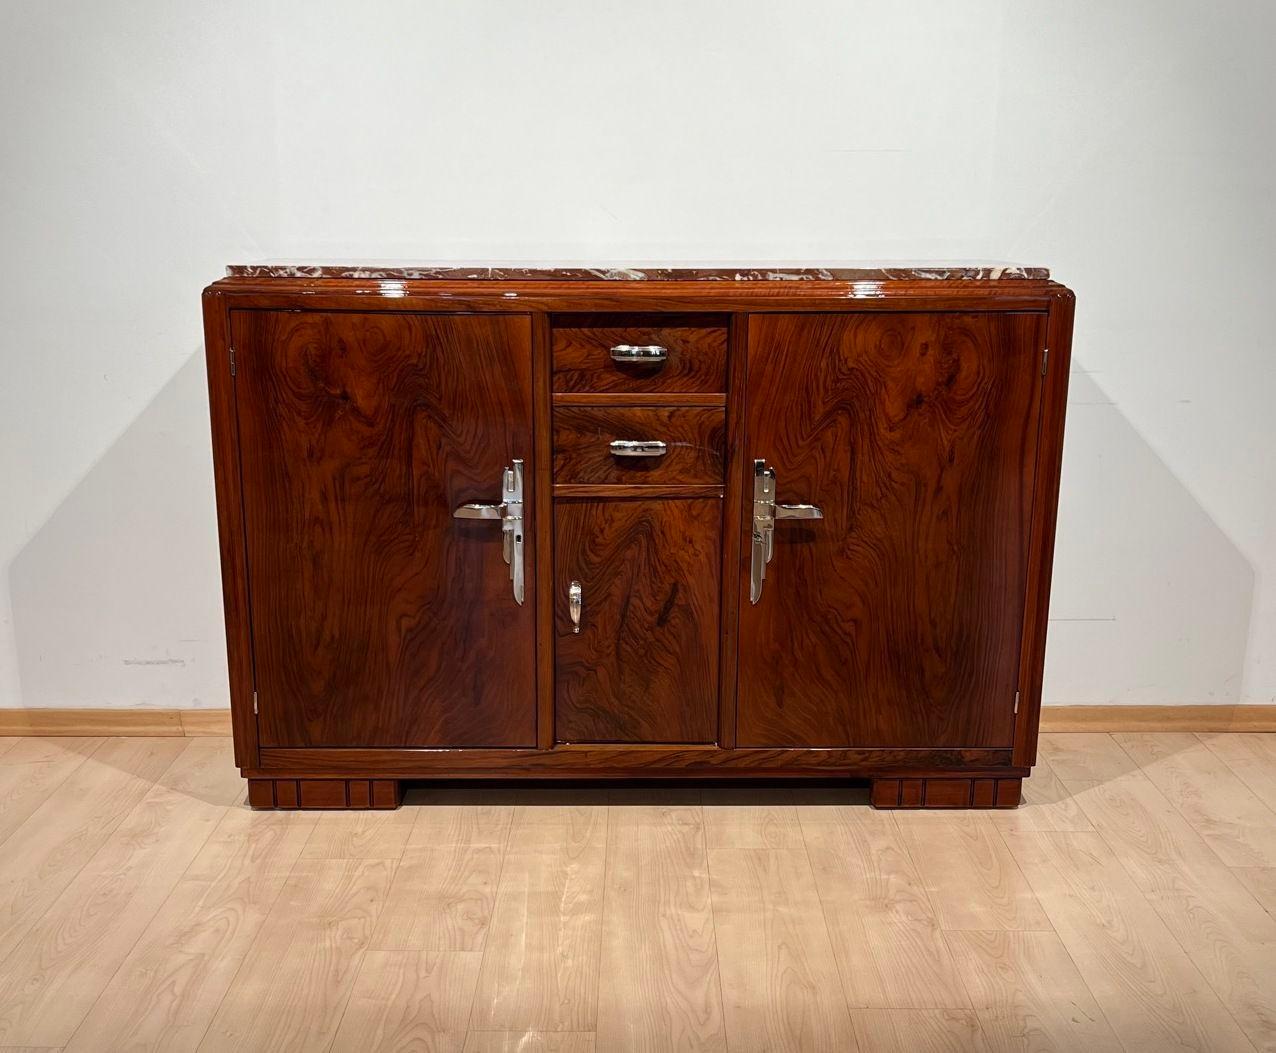 Lacquered Art Deco Sideboard, Walnut, Lacquer, Nickel, France circa 1930 For Sale